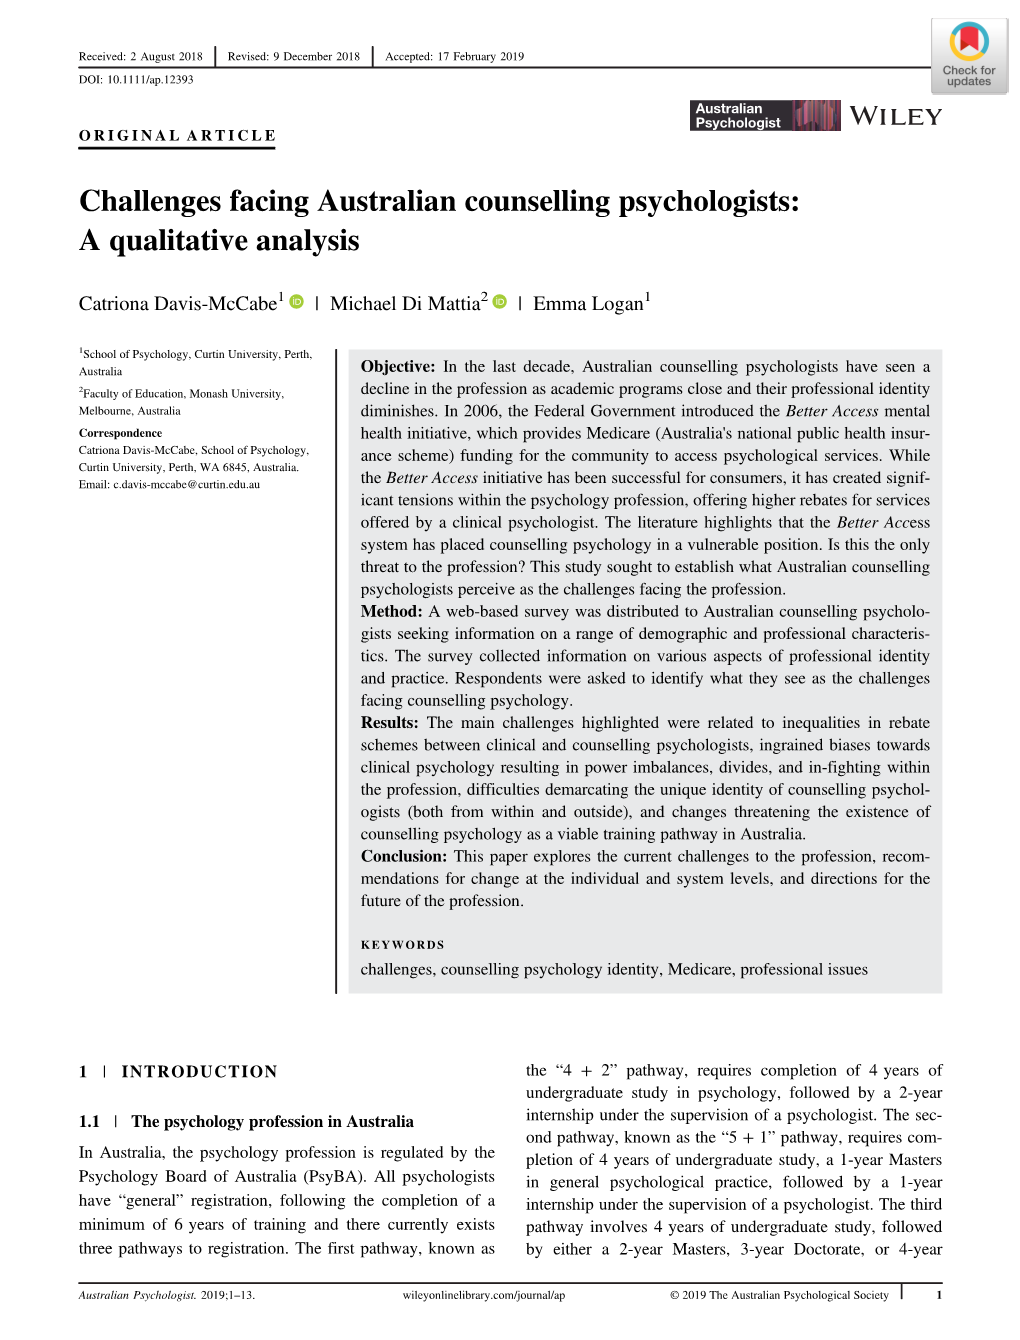 Challenges Facing Australian Counselling Psychologists: a Qualitative Analysis